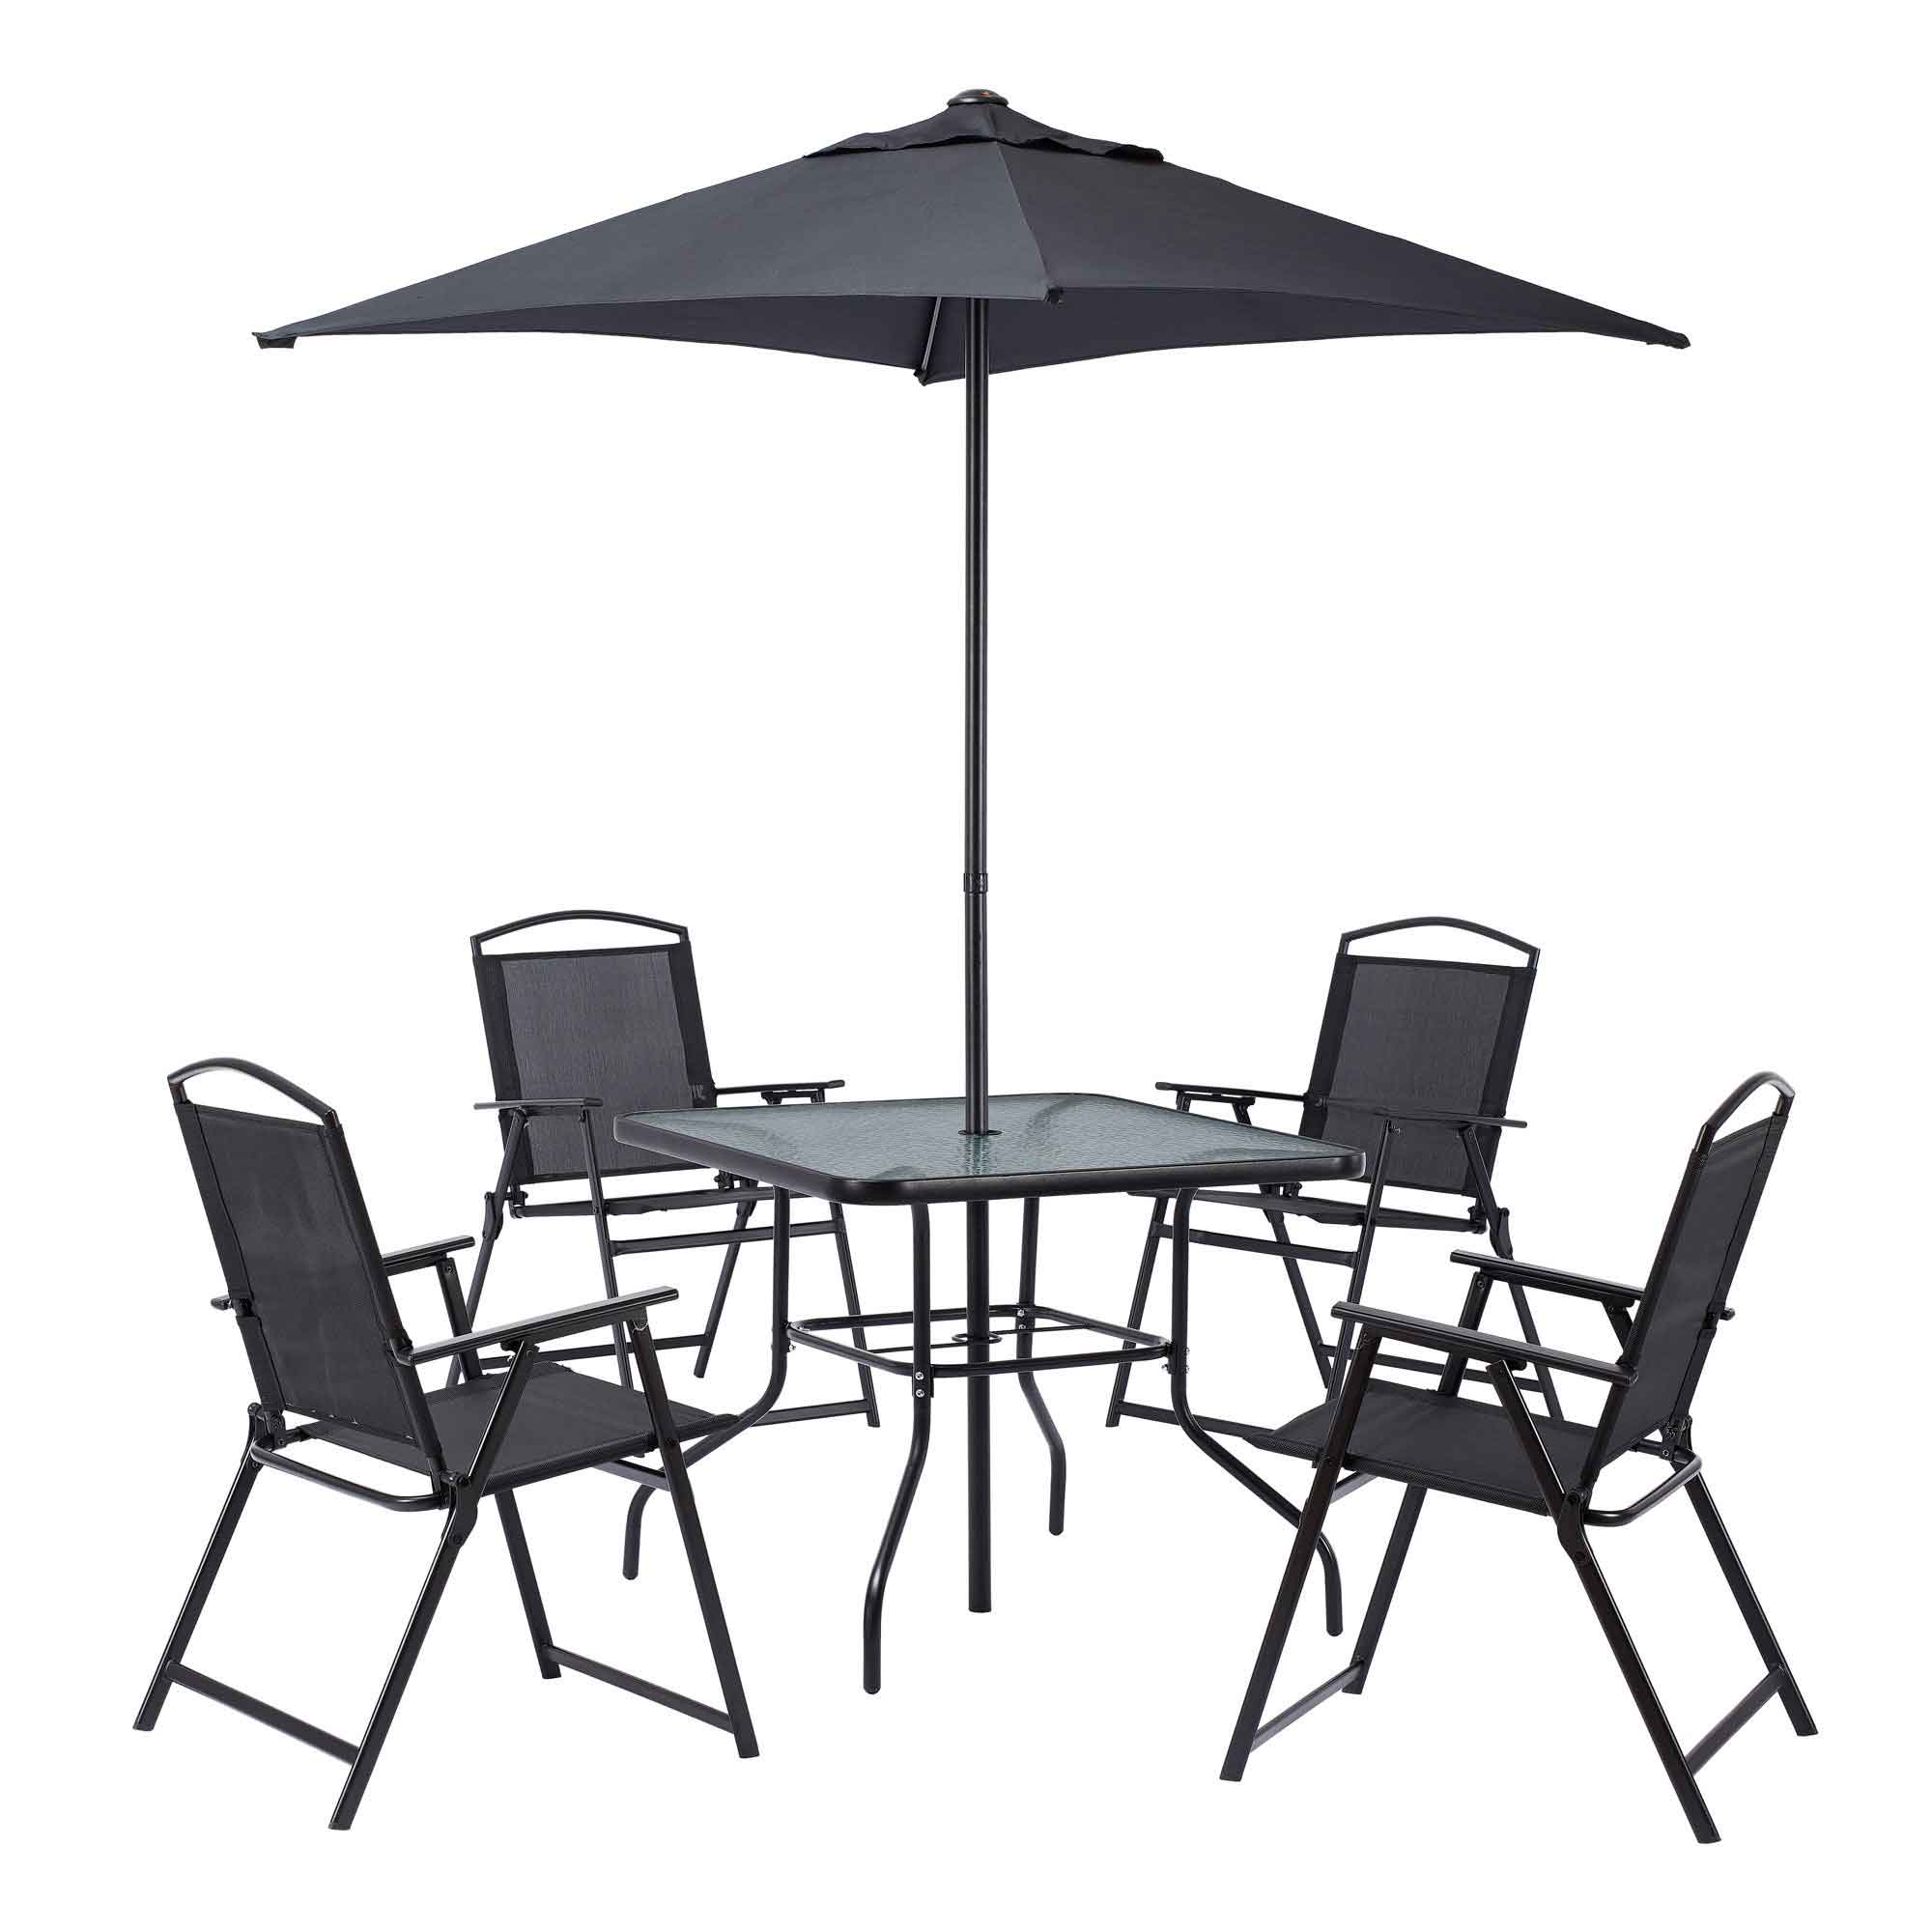 Details about   _NEW_Mainstays Albany Lane 6 Piece Outdoor Patio Dining Set 